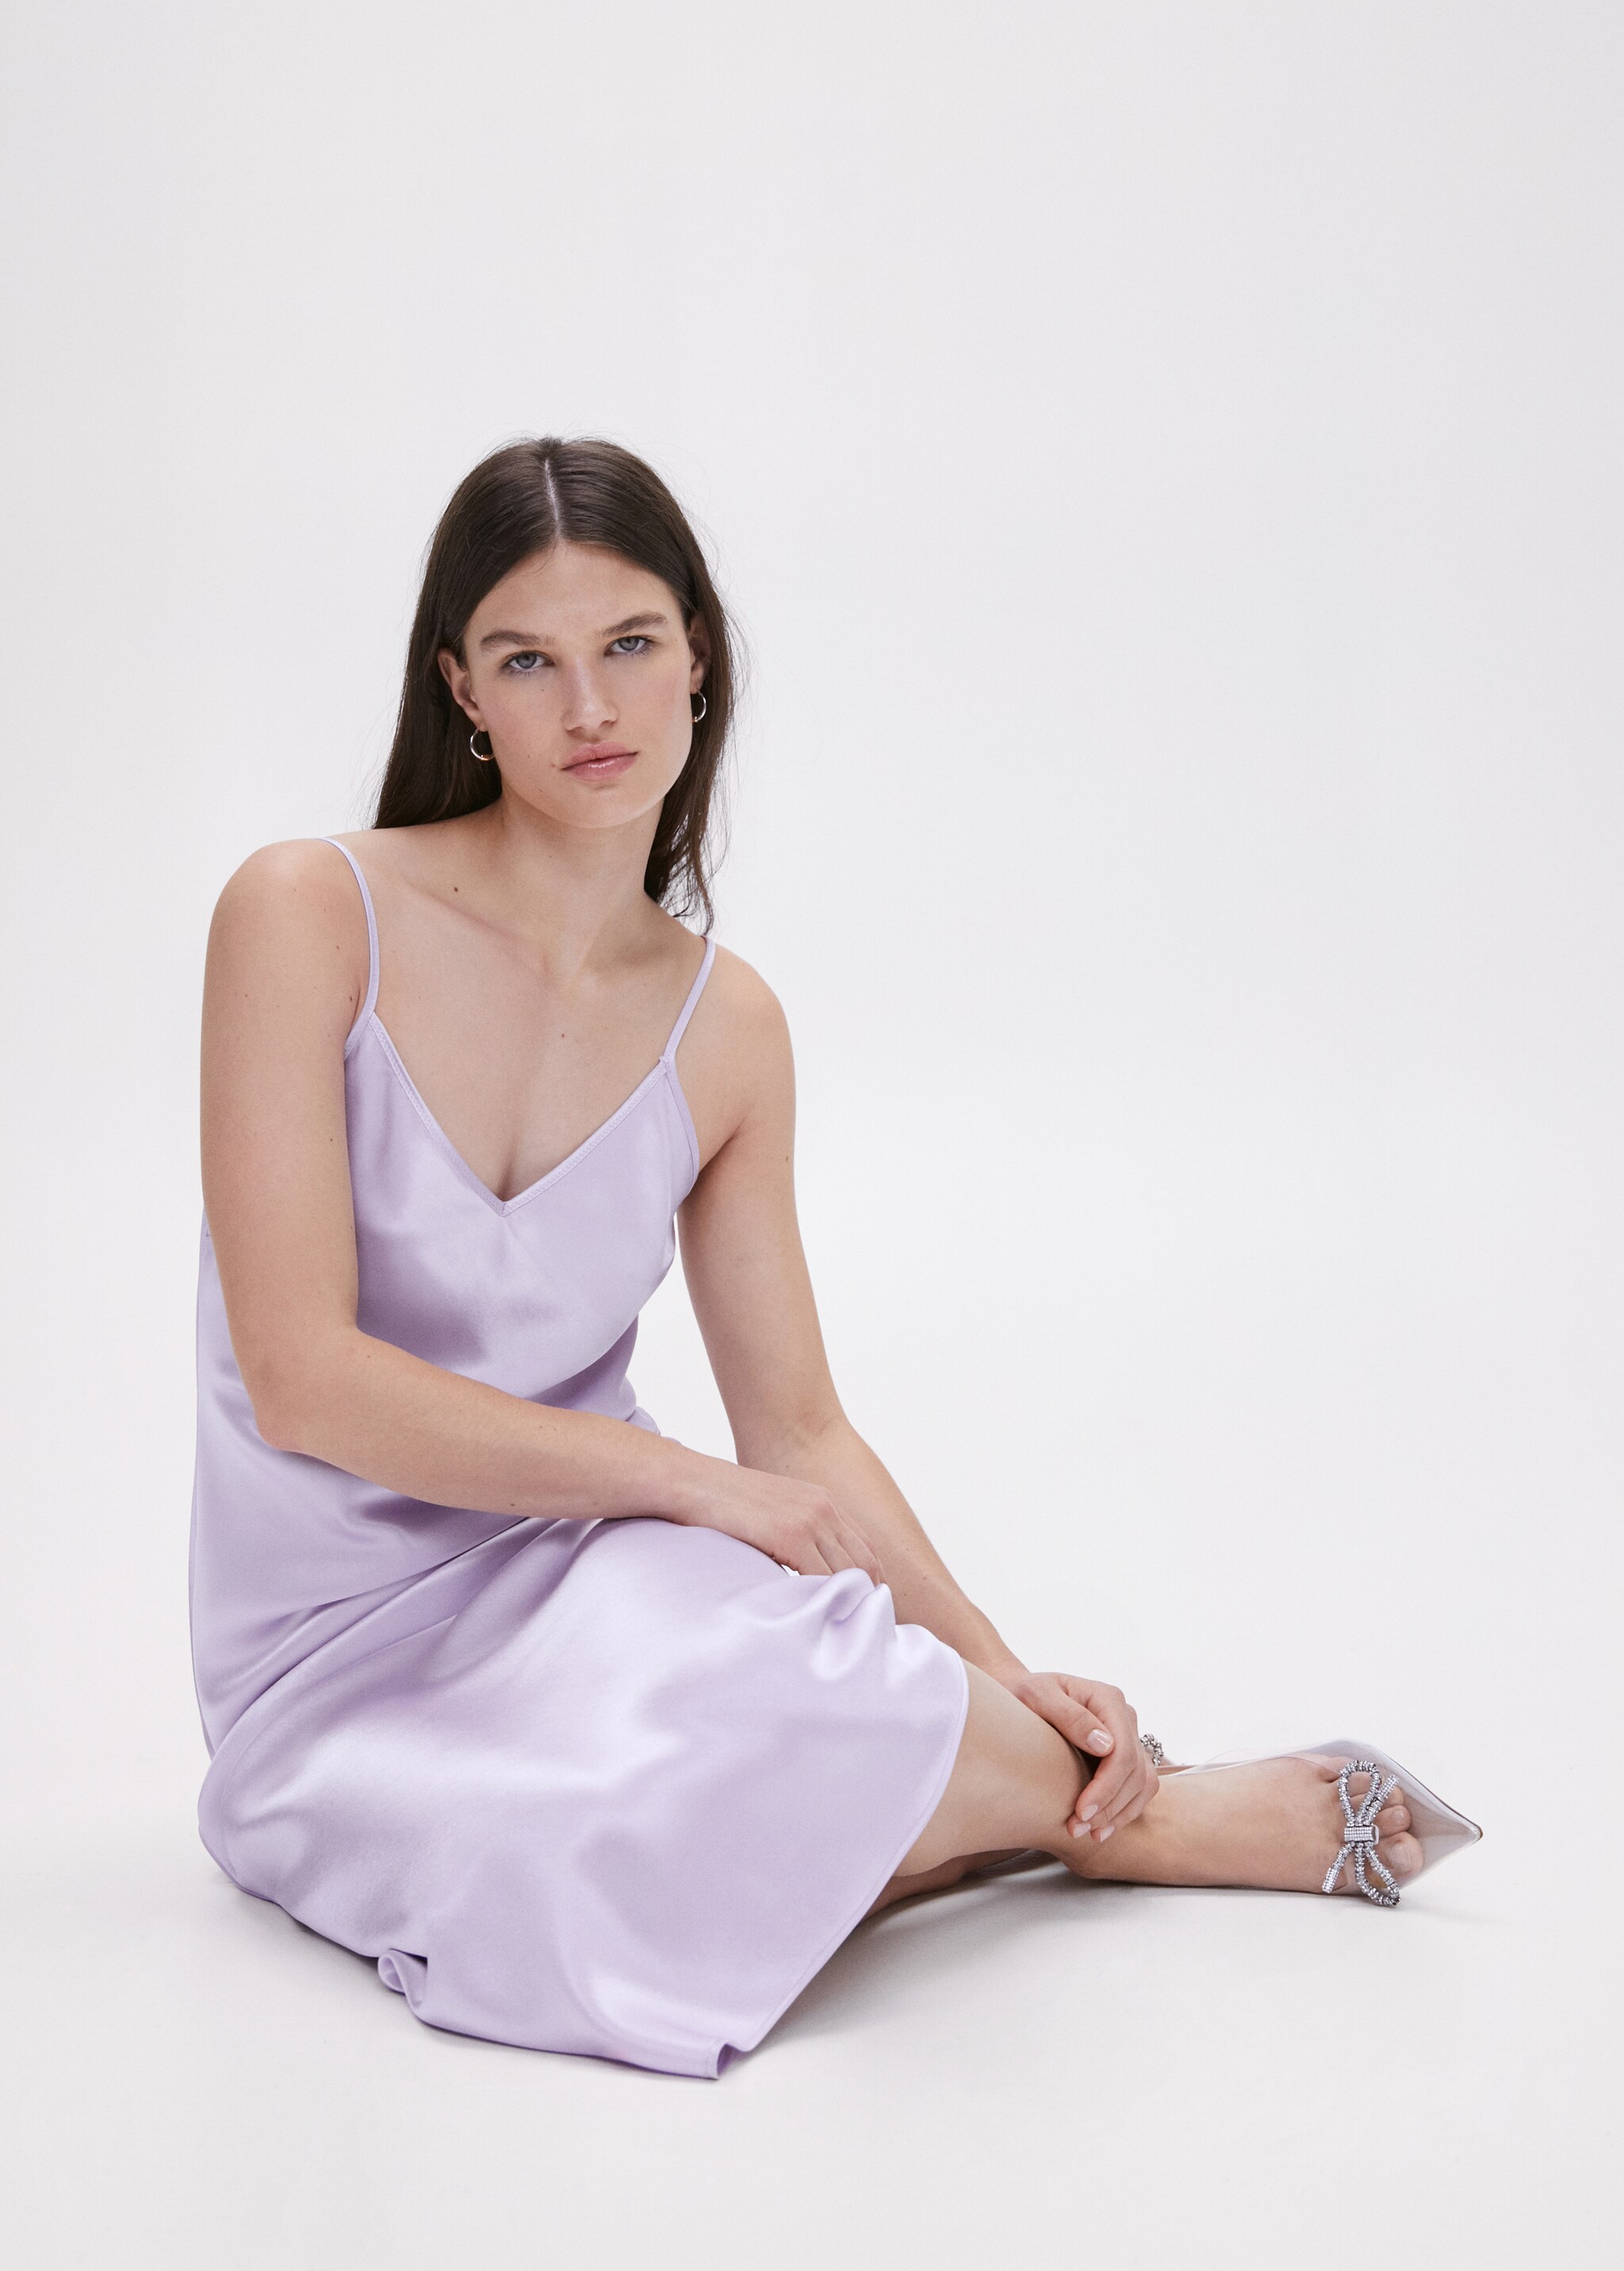 Satin camisole dress - Details of the article 2